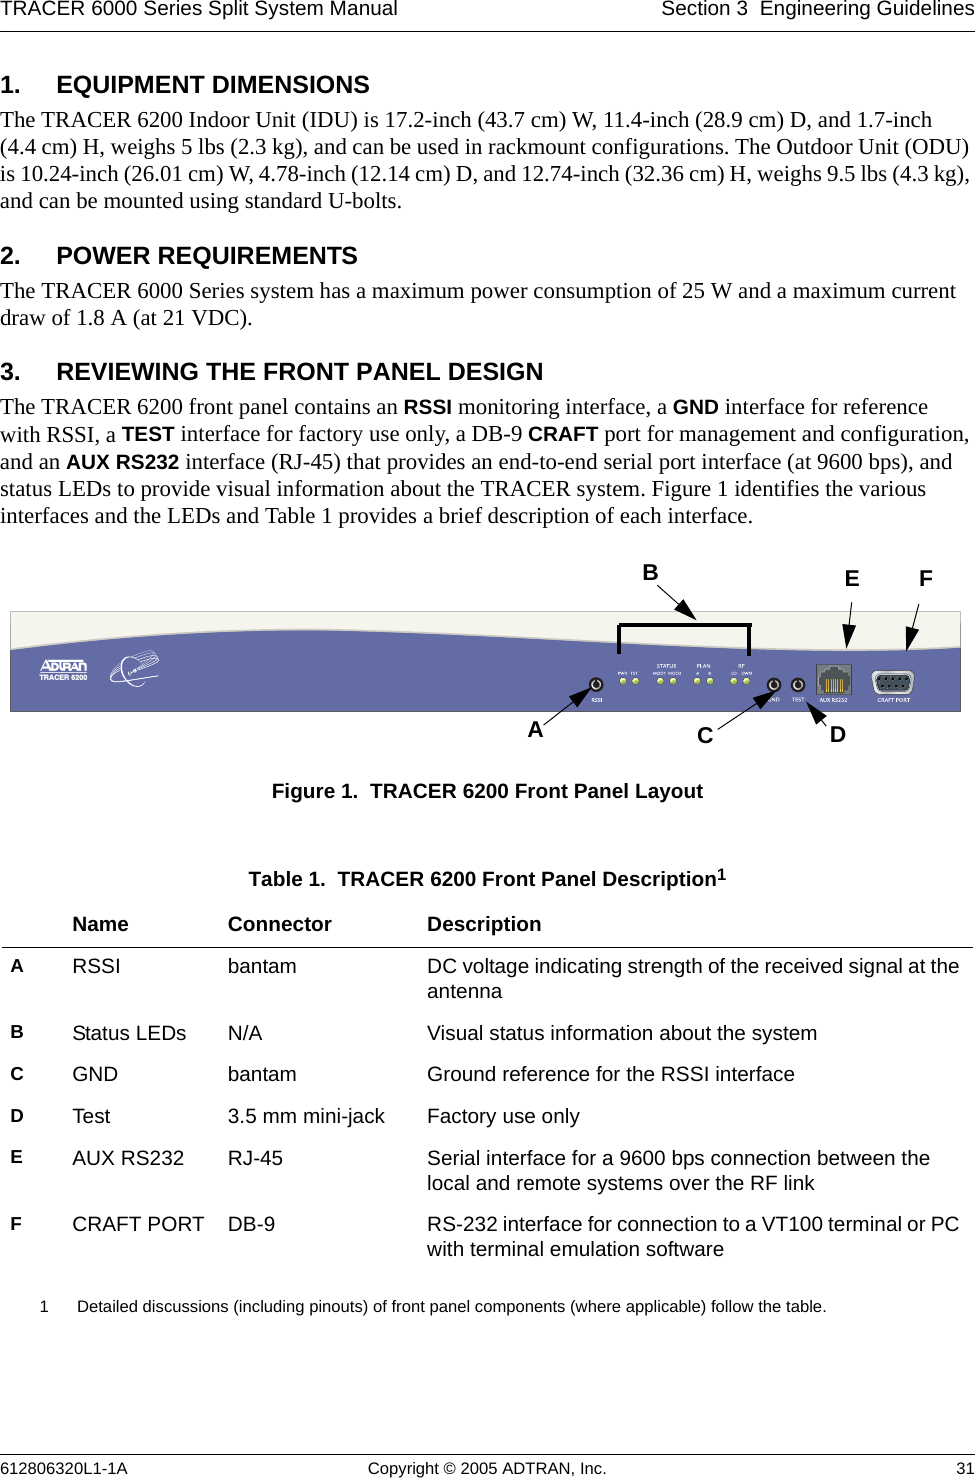 TRACER 6000 Series Split System Manual Section 3  Engineering Guidelines612806320L1-1A Copyright © 2005 ADTRAN, Inc. 311. EQUIPMENT DIMENSIONSThe TRACER 6200 Indoor Unit (IDU) is 17.2-inch (43.7 cm) W, 11.4-inch (28.9 cm) D, and 1.7-inch (4.4 cm) H, weighs 5 lbs (2.3 kg), and can be used in rackmount configurations. The Outdoor Unit (ODU) is 10.24-inch (26.01 cm) W, 4.78-inch (12.14 cm) D, and 12.74-inch (32.36 cm) H, weighs 9.5 lbs (4.3 kg), and can be mounted using standard U-bolts.2. POWER REQUIREMENTSThe TRACER 6000 Series system has a maximum power consumption of 25 W and a maximum current draw of 1.8 A (at 21 VDC).3. REVIEWING THE FRONT PANEL DESIGNThe TRACER 6200 front panel contains an RSSI monitoring interface, a GND interface for reference with RSSI, a TEST interface for factory use only, a DB-9 CRAFT port for management and configuration, and an AUX RS232 interface (RJ-45) that provides an end-to-end serial port interface (at 9600 bps), and status LEDs to provide visual information about the TRACER system. Figure 1 identifies the various interfaces and the LEDs and Table 1 provides a brief description of each interface.Figure 1.  TRACER 6200 Front Panel LayoutTable 1.  TRACER 6200 Front Panel Description1 1 Detailed discussions (including pinouts) of front panel components (where applicable) follow the table.Name Connector DescriptionARSSI bantam DC voltage indicating strength of the received signal at the antennaBStatus LEDs N/A Visual status information about the systemCGND bantam Ground reference for the RSSI interfaceDTest 3.5 mm mini-jack Factory use onlyEAUX RS232 RJ-45 Serial interface for a 9600 bps connection between the local and remote systems over the RF linkFCRAFT PORT DB-9 RS-232 interface for connection to a VT100 terminal or PC with terminal emulation softwareTRACER 6200BCAE  F D 